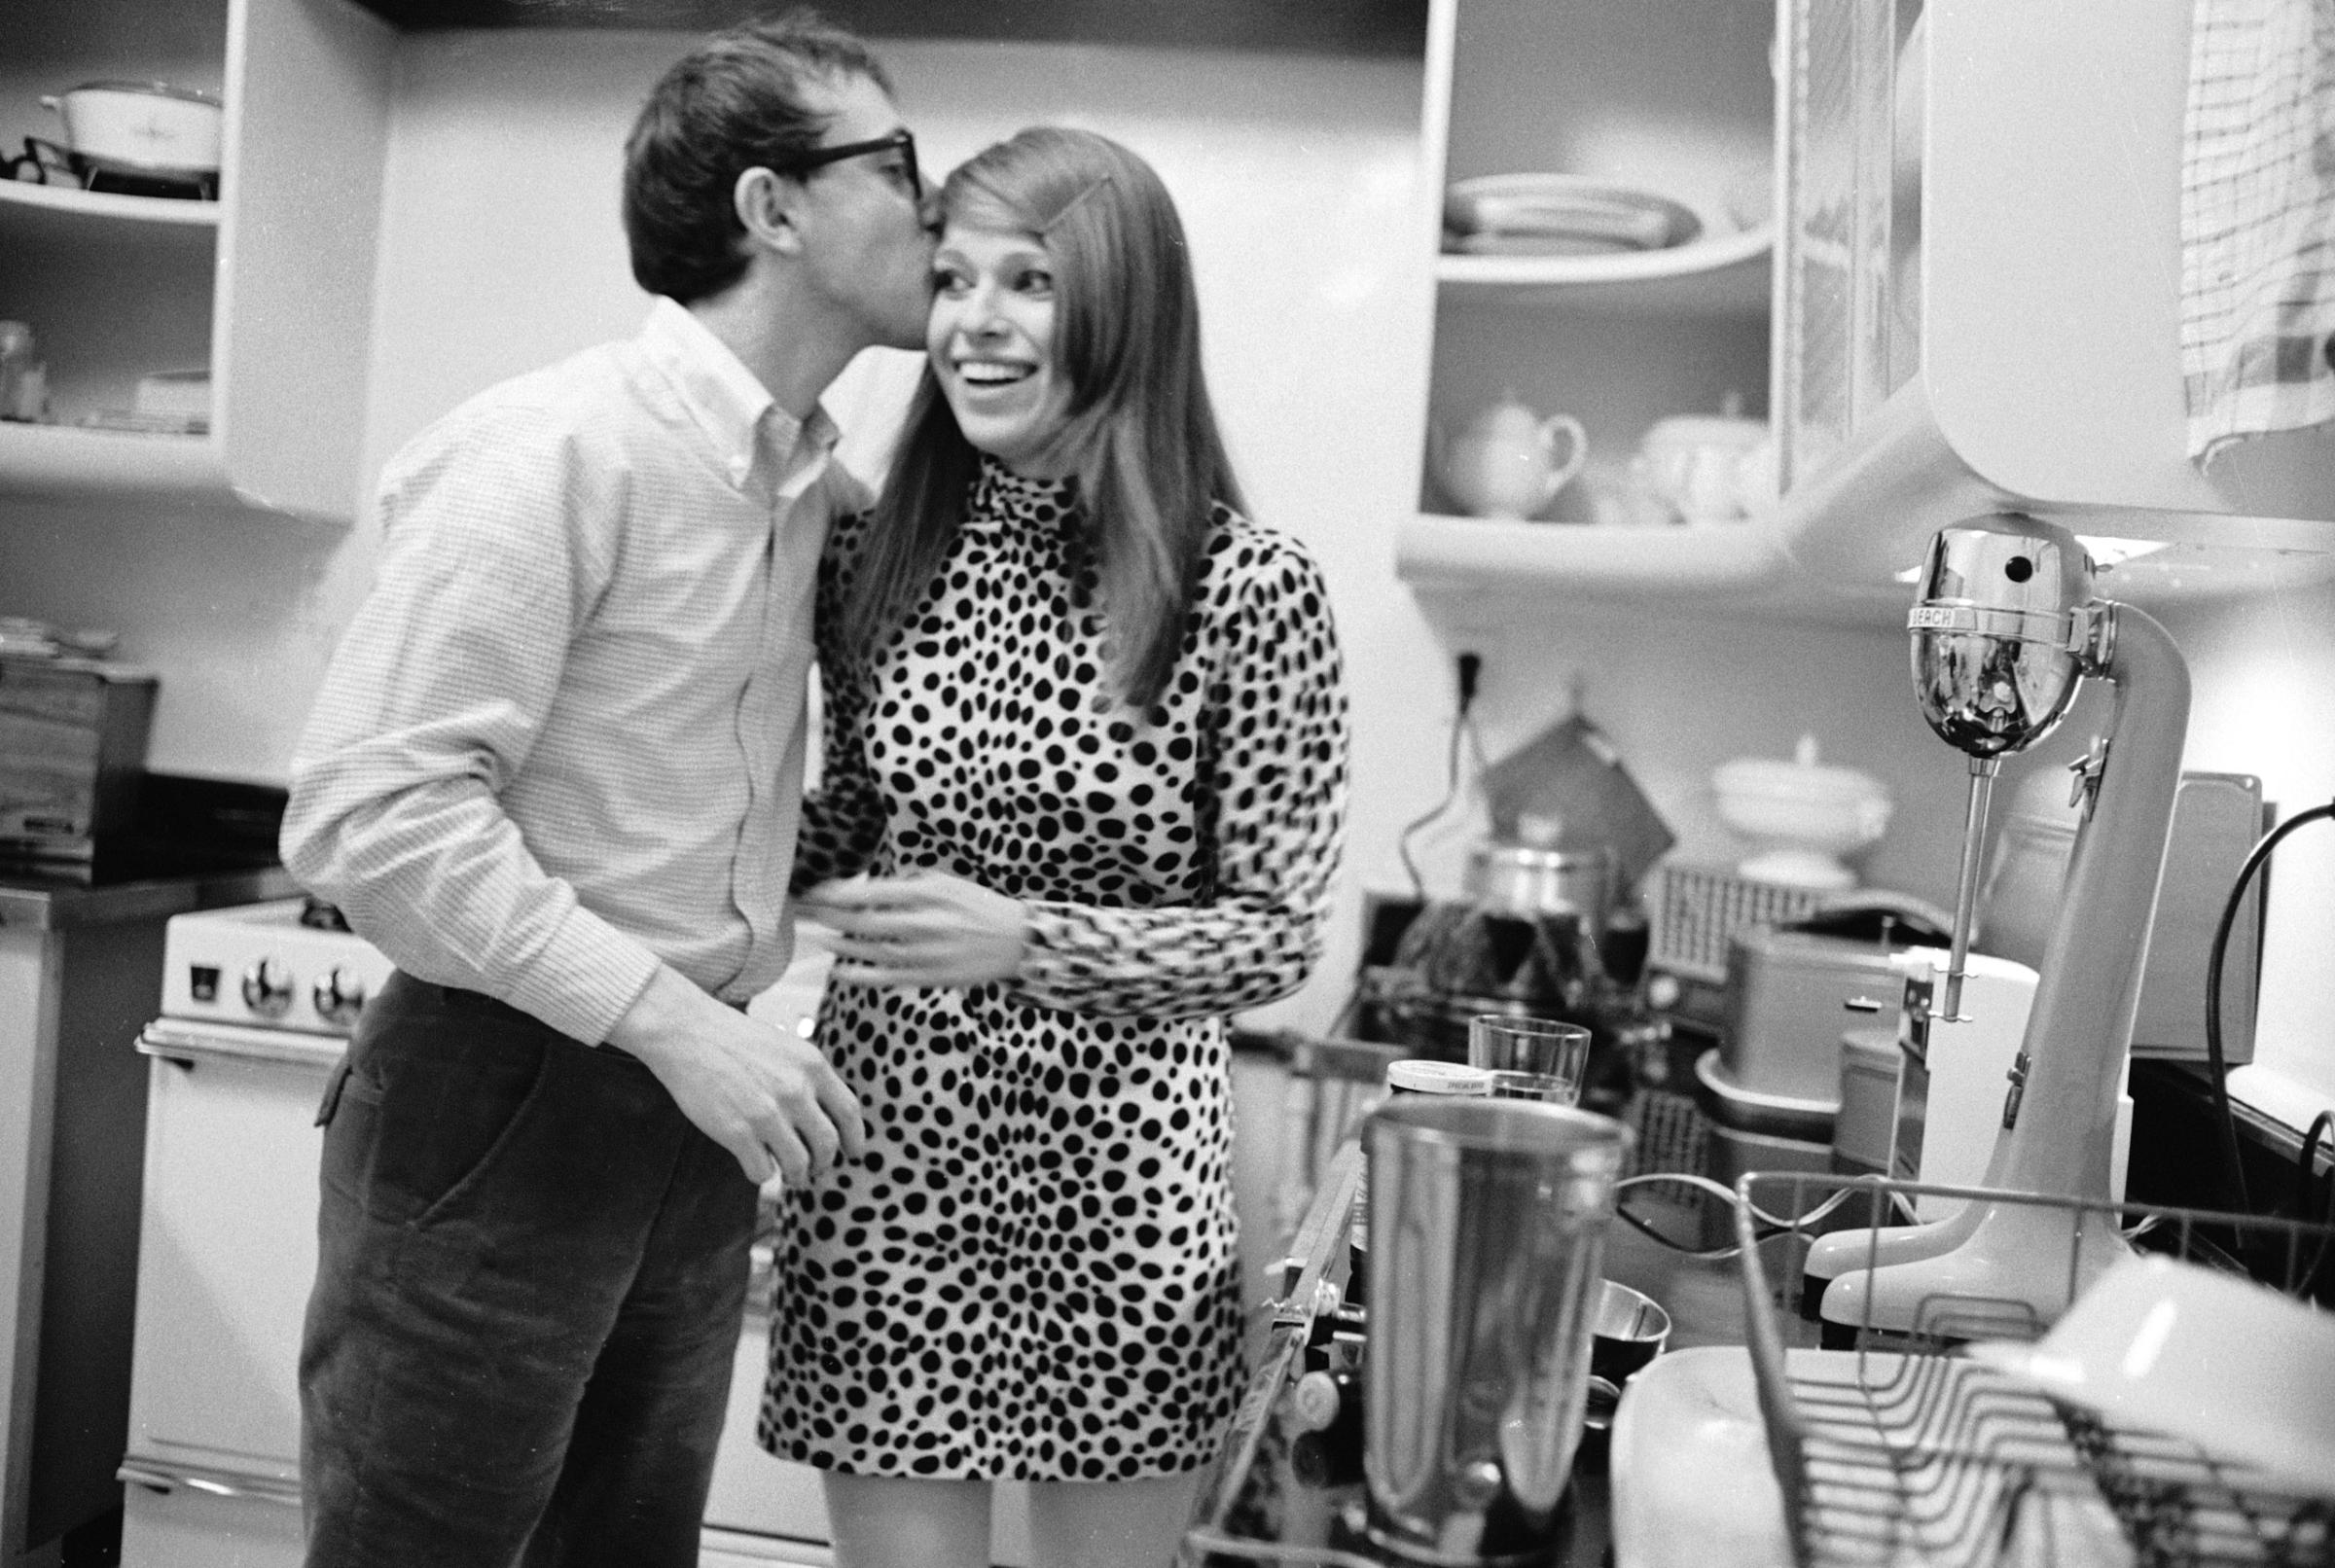 Woody Allen and wife Louise Lasser at home in Manhattan, 1967.